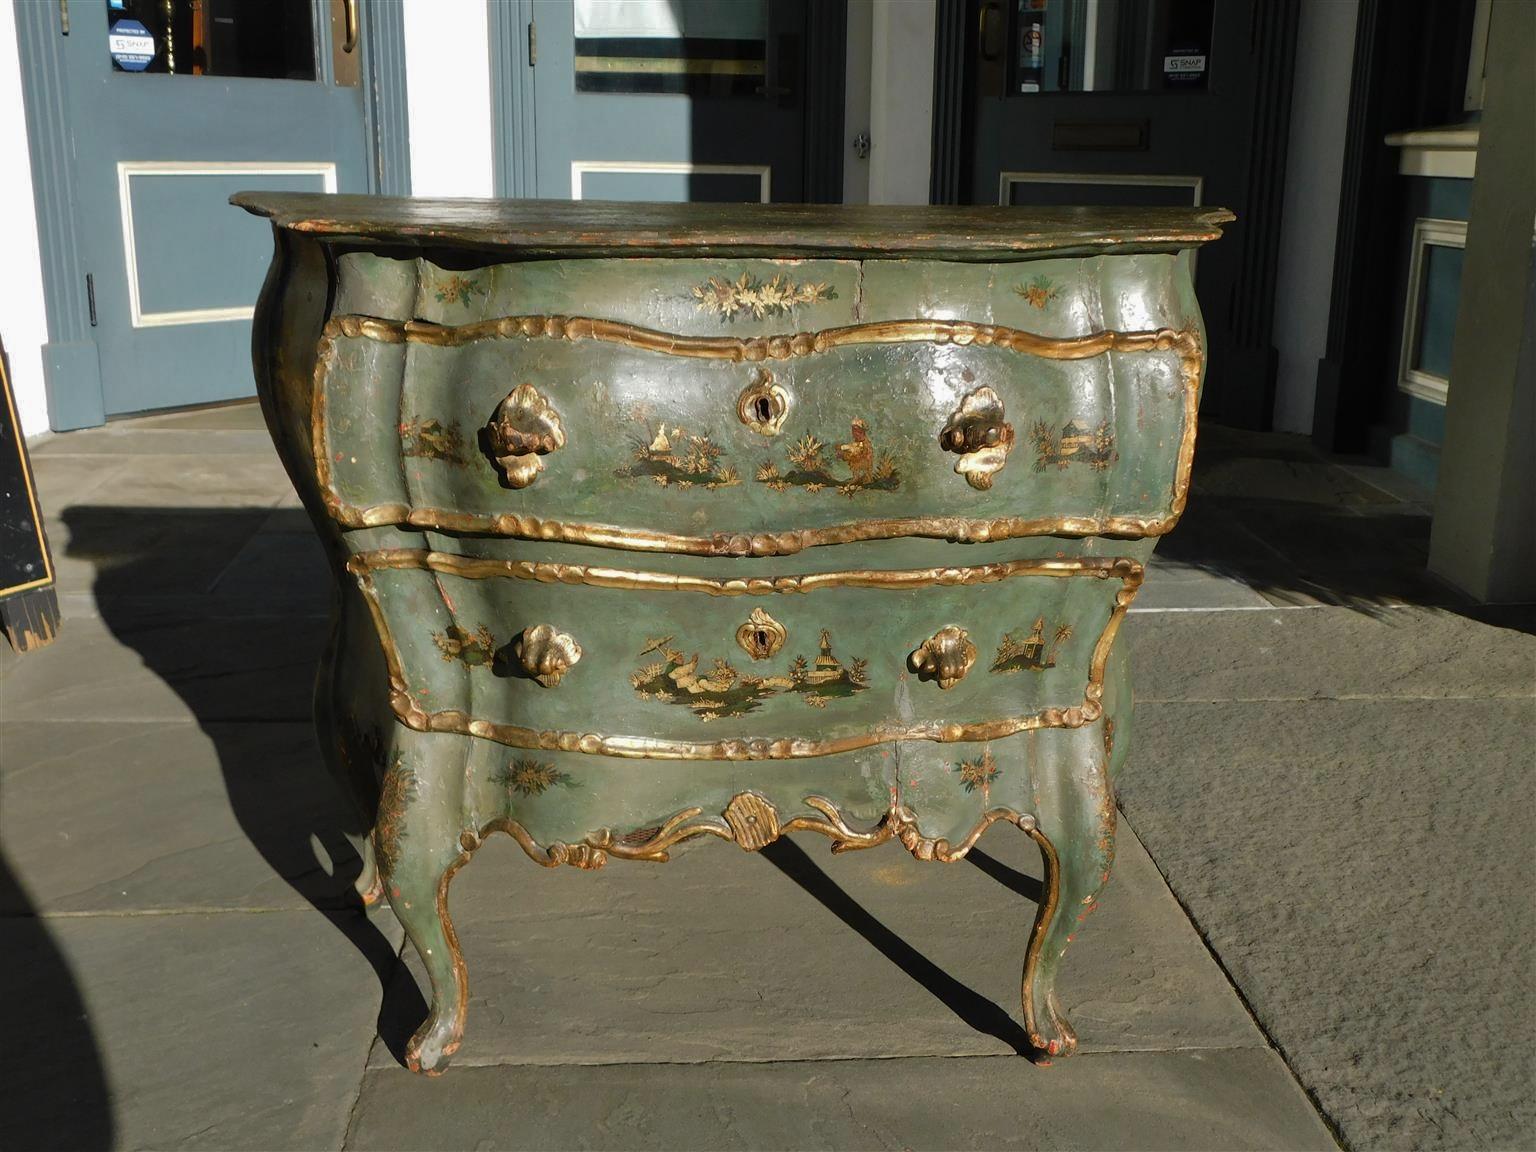 Venetian hand painted and gilt figural pagoda two-drawer commode with scalloped edge top, gilt carved shell form handles, and resting on a scalloped edge floral skirt with the original cabriole legs, Late 18th Century.